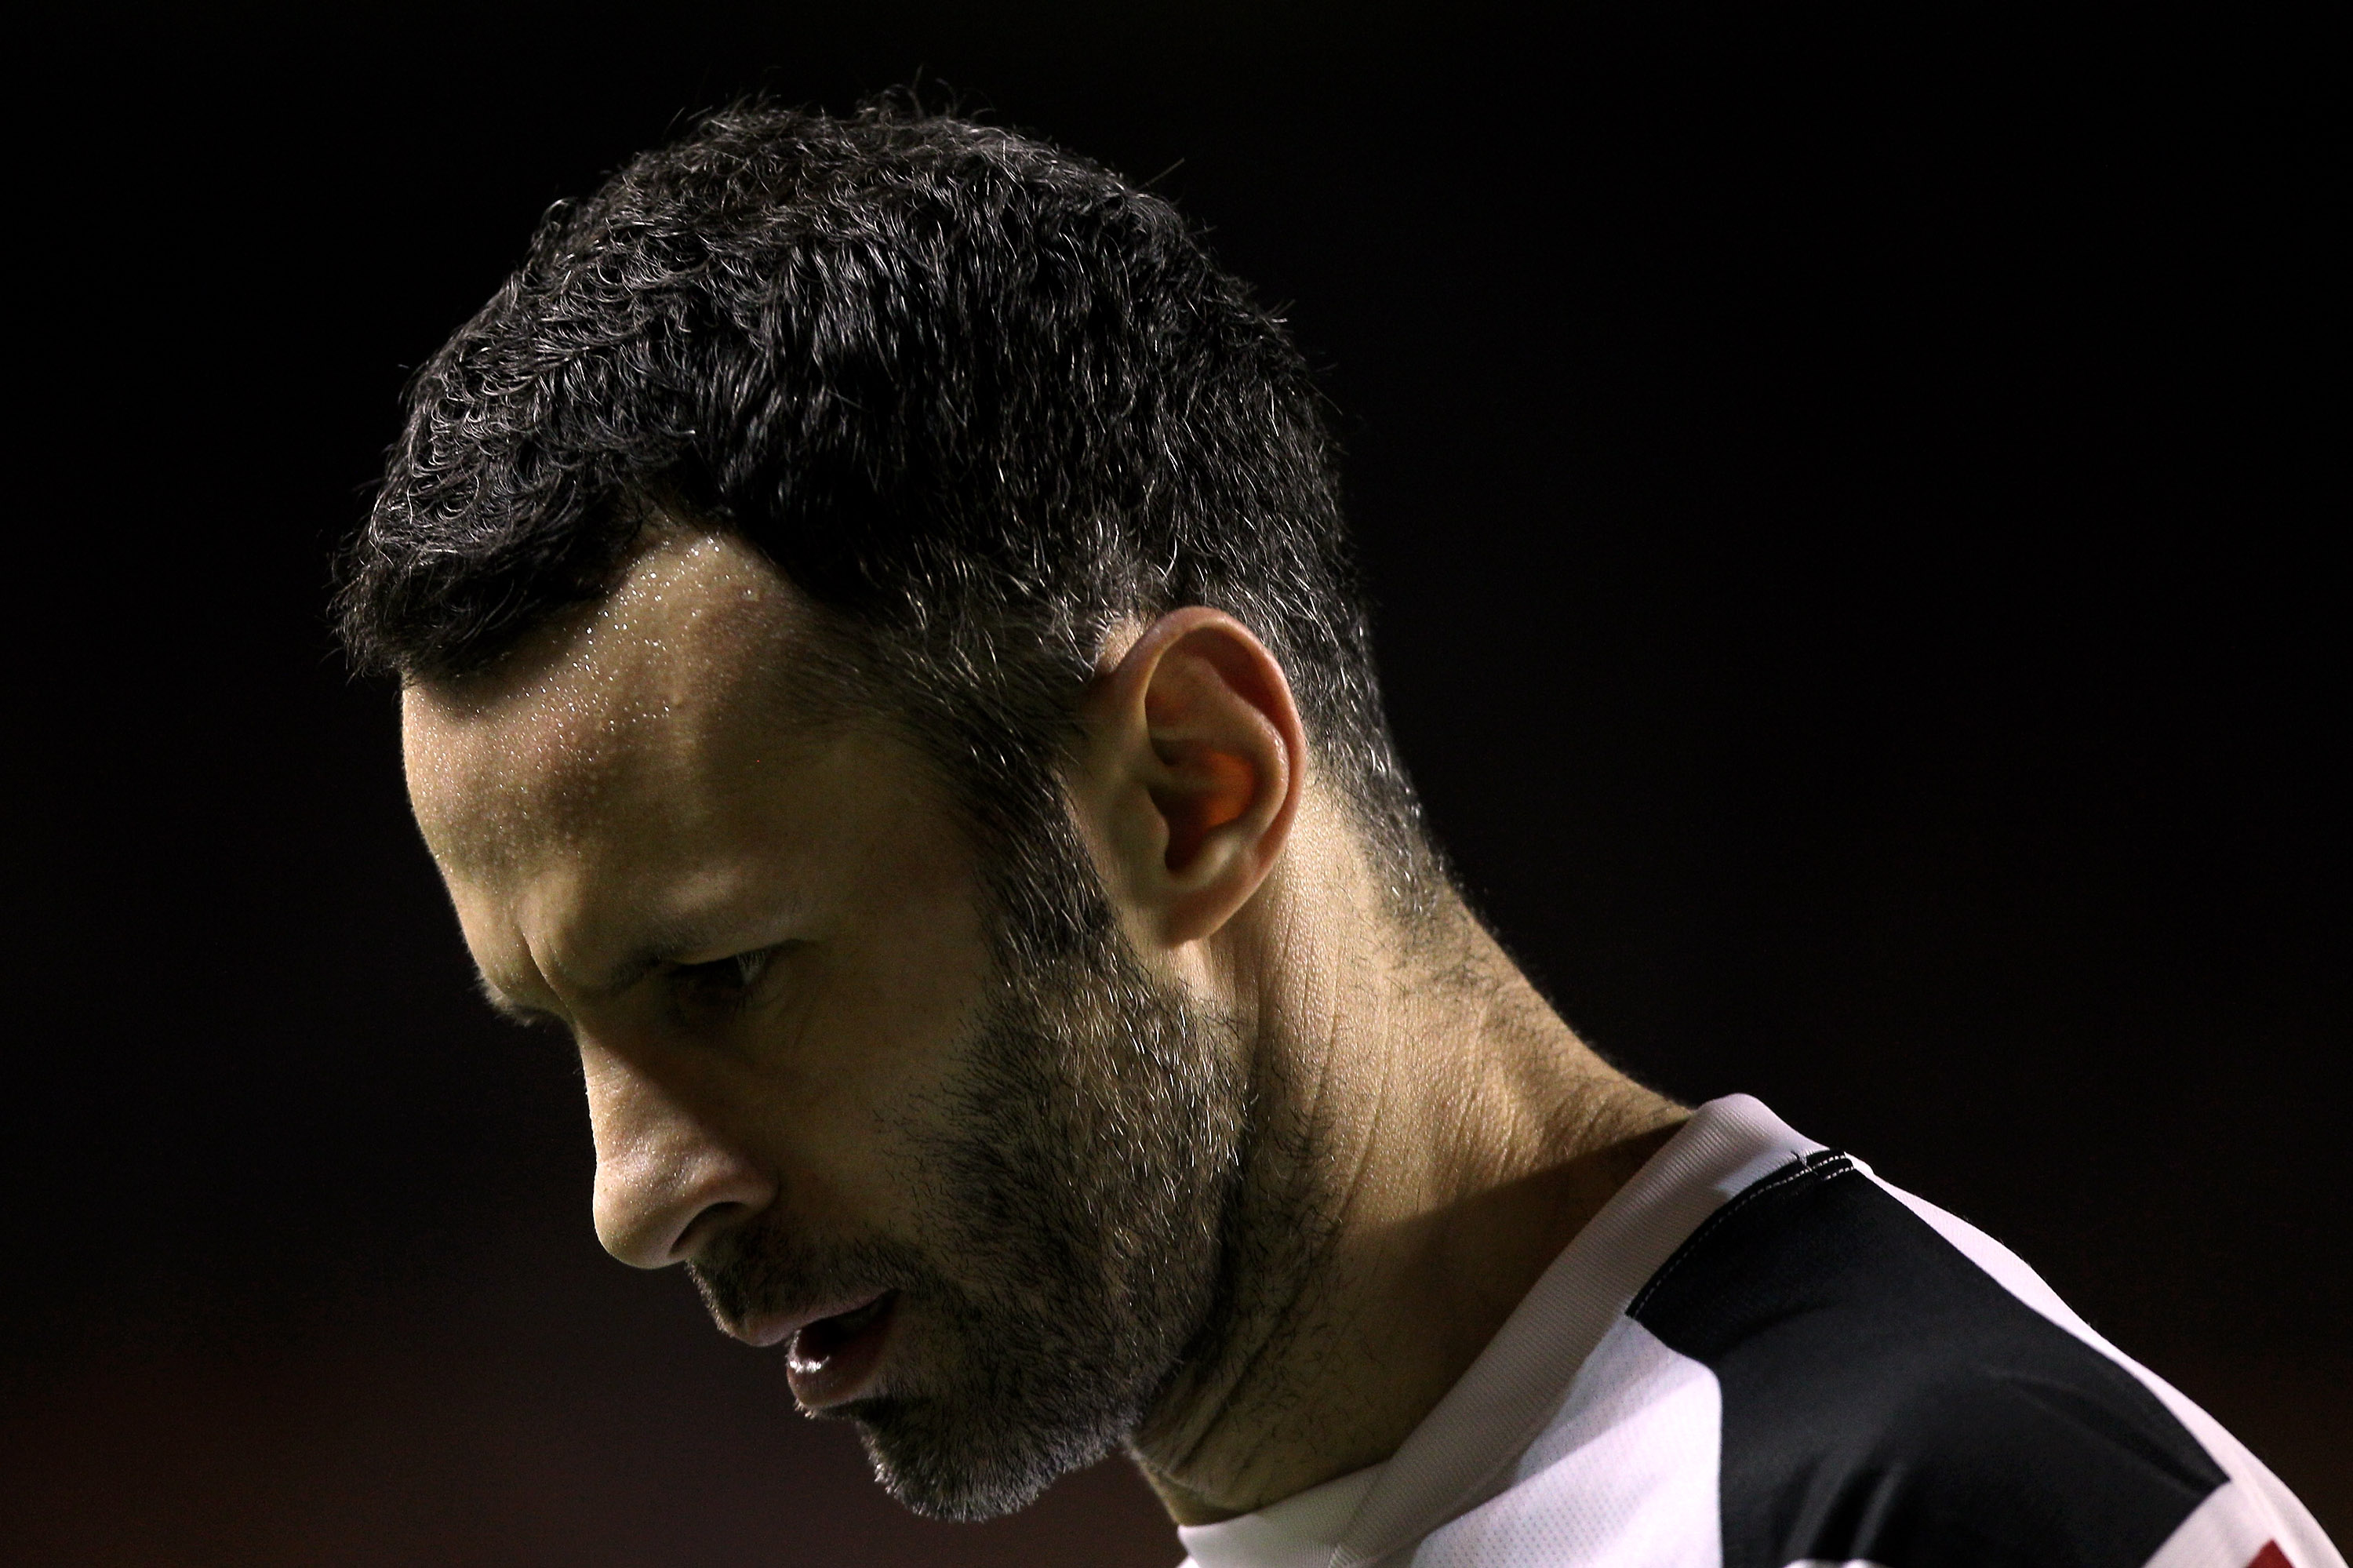 WOLVERHAMPTON, ENGLAND - FEBRUARY 05:  Ryan Giggs of Manchester United reacts during the Barclays Premier League match between Wolverhampton Wanderers and Manchester United at Molineux on February 5, 2011 in Wolverhampton, England.  (Photo by Michael Stee